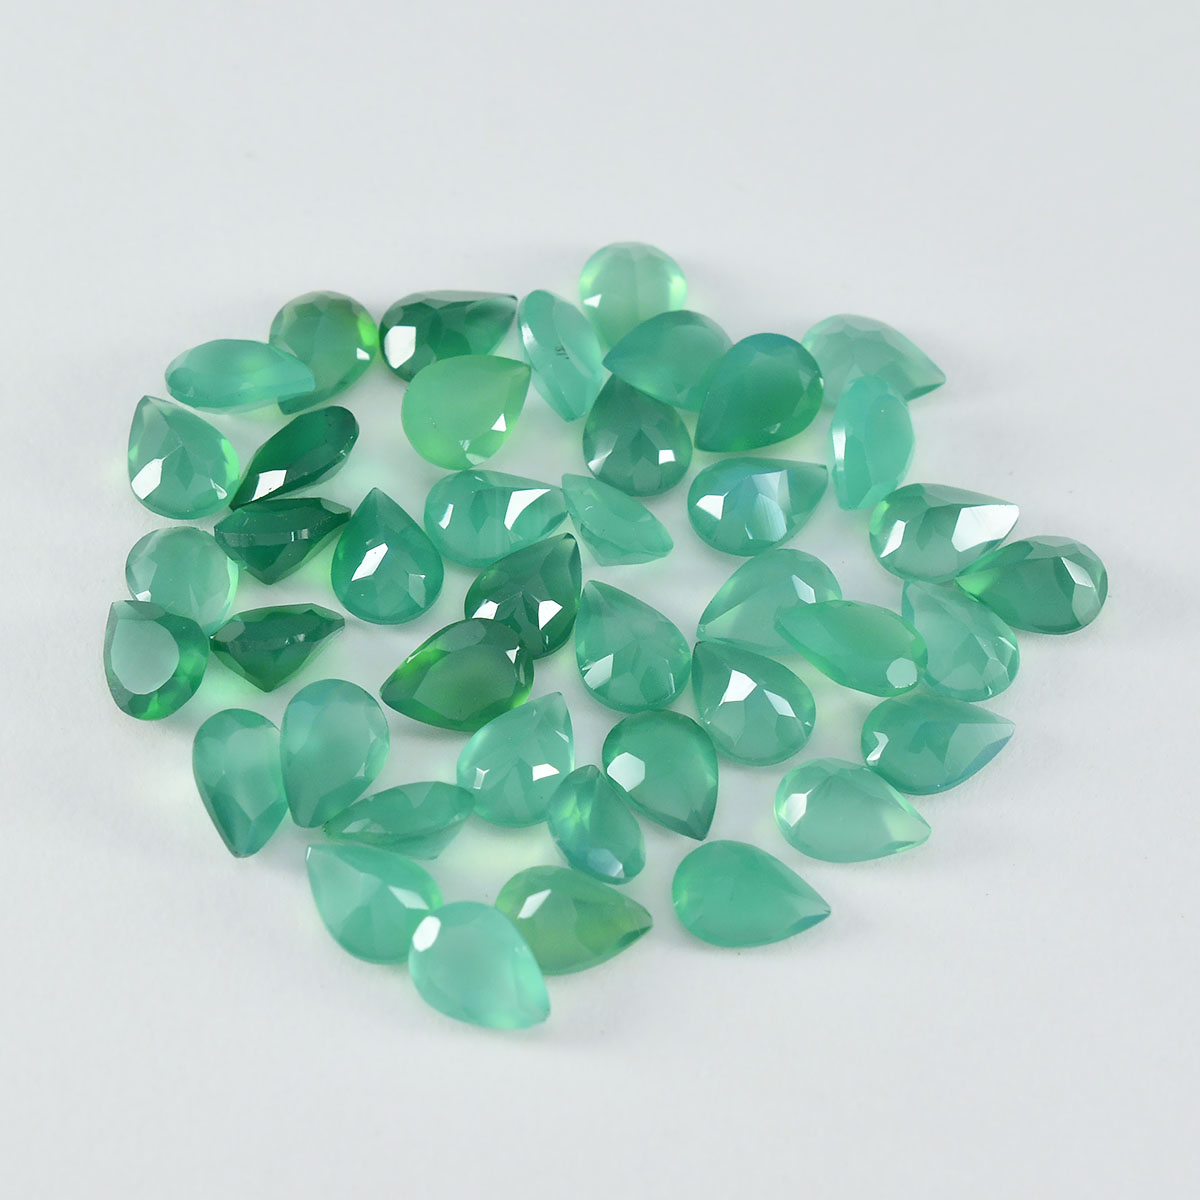 Riyogems 1PC Natural Green Onyx Faceted 4x6 mm Pear Shape awesome Quality Loose Gemstone